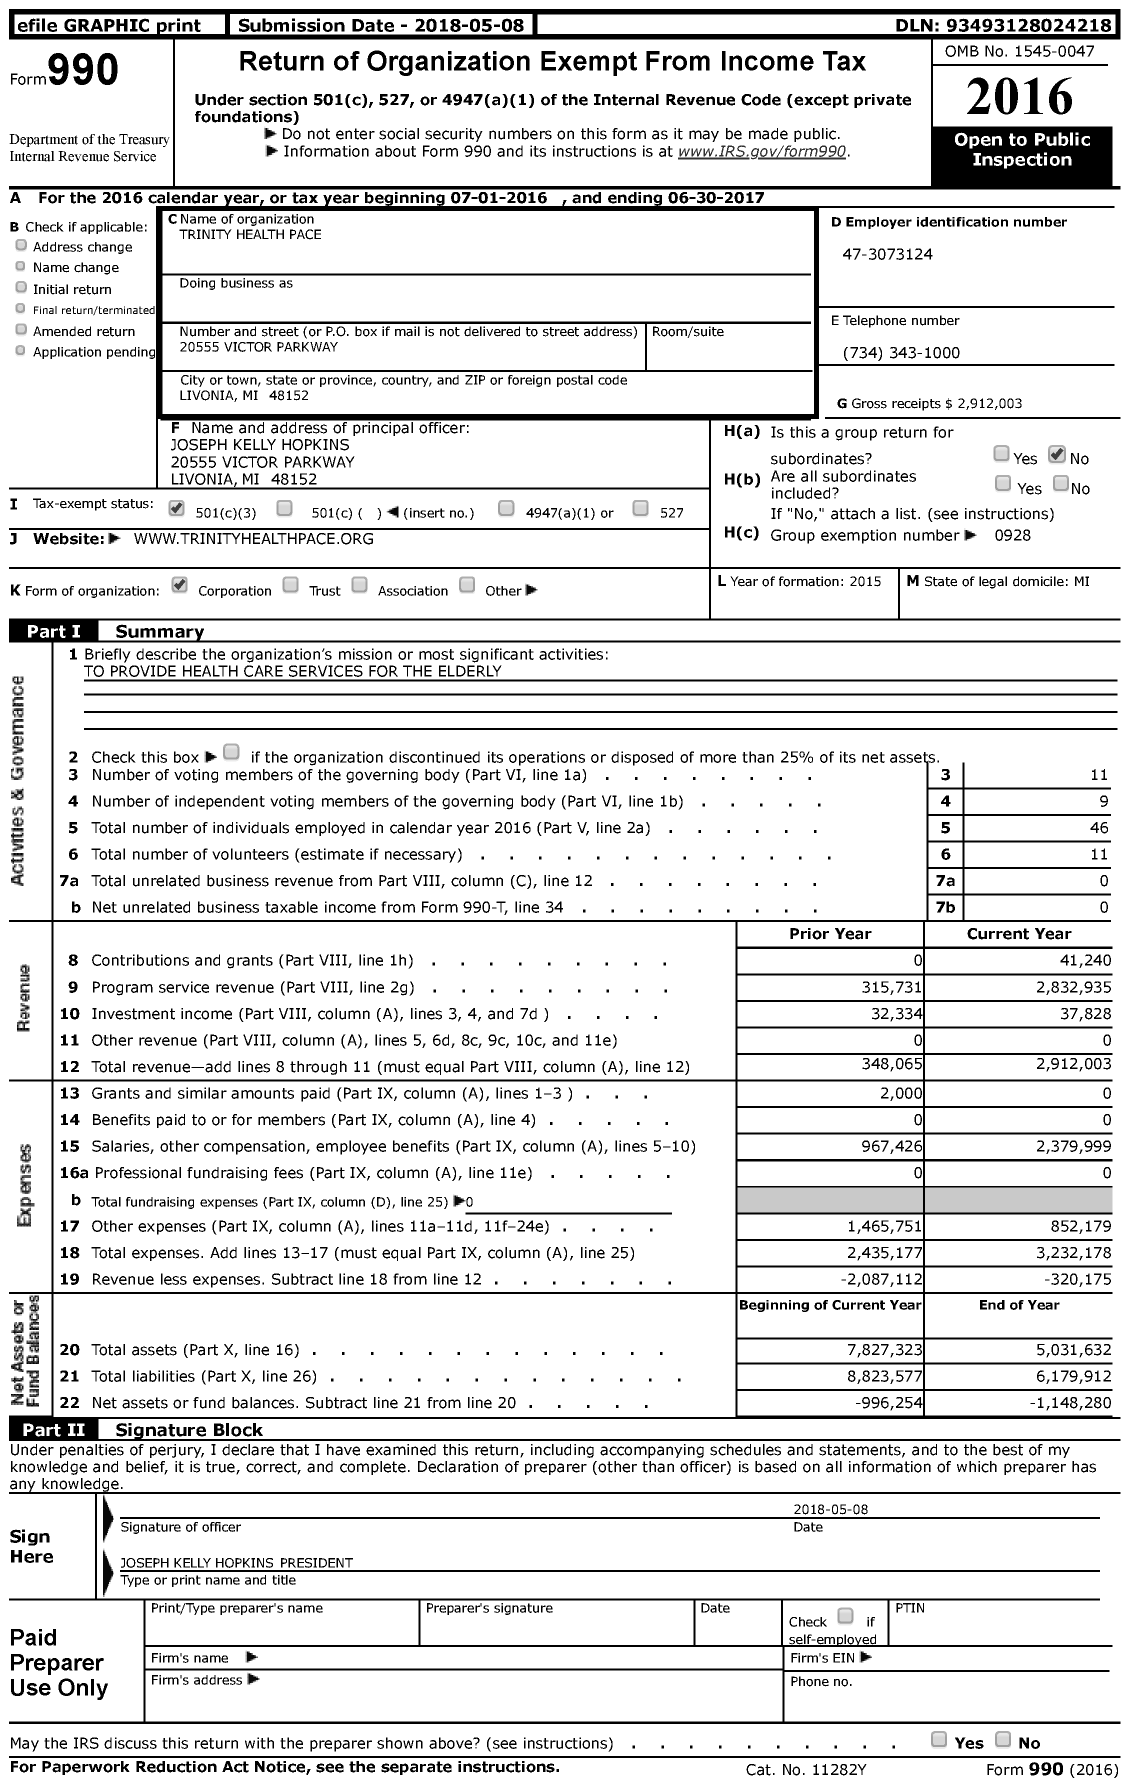 Image of first page of 2016 Form 990 for Trinity Health Pace